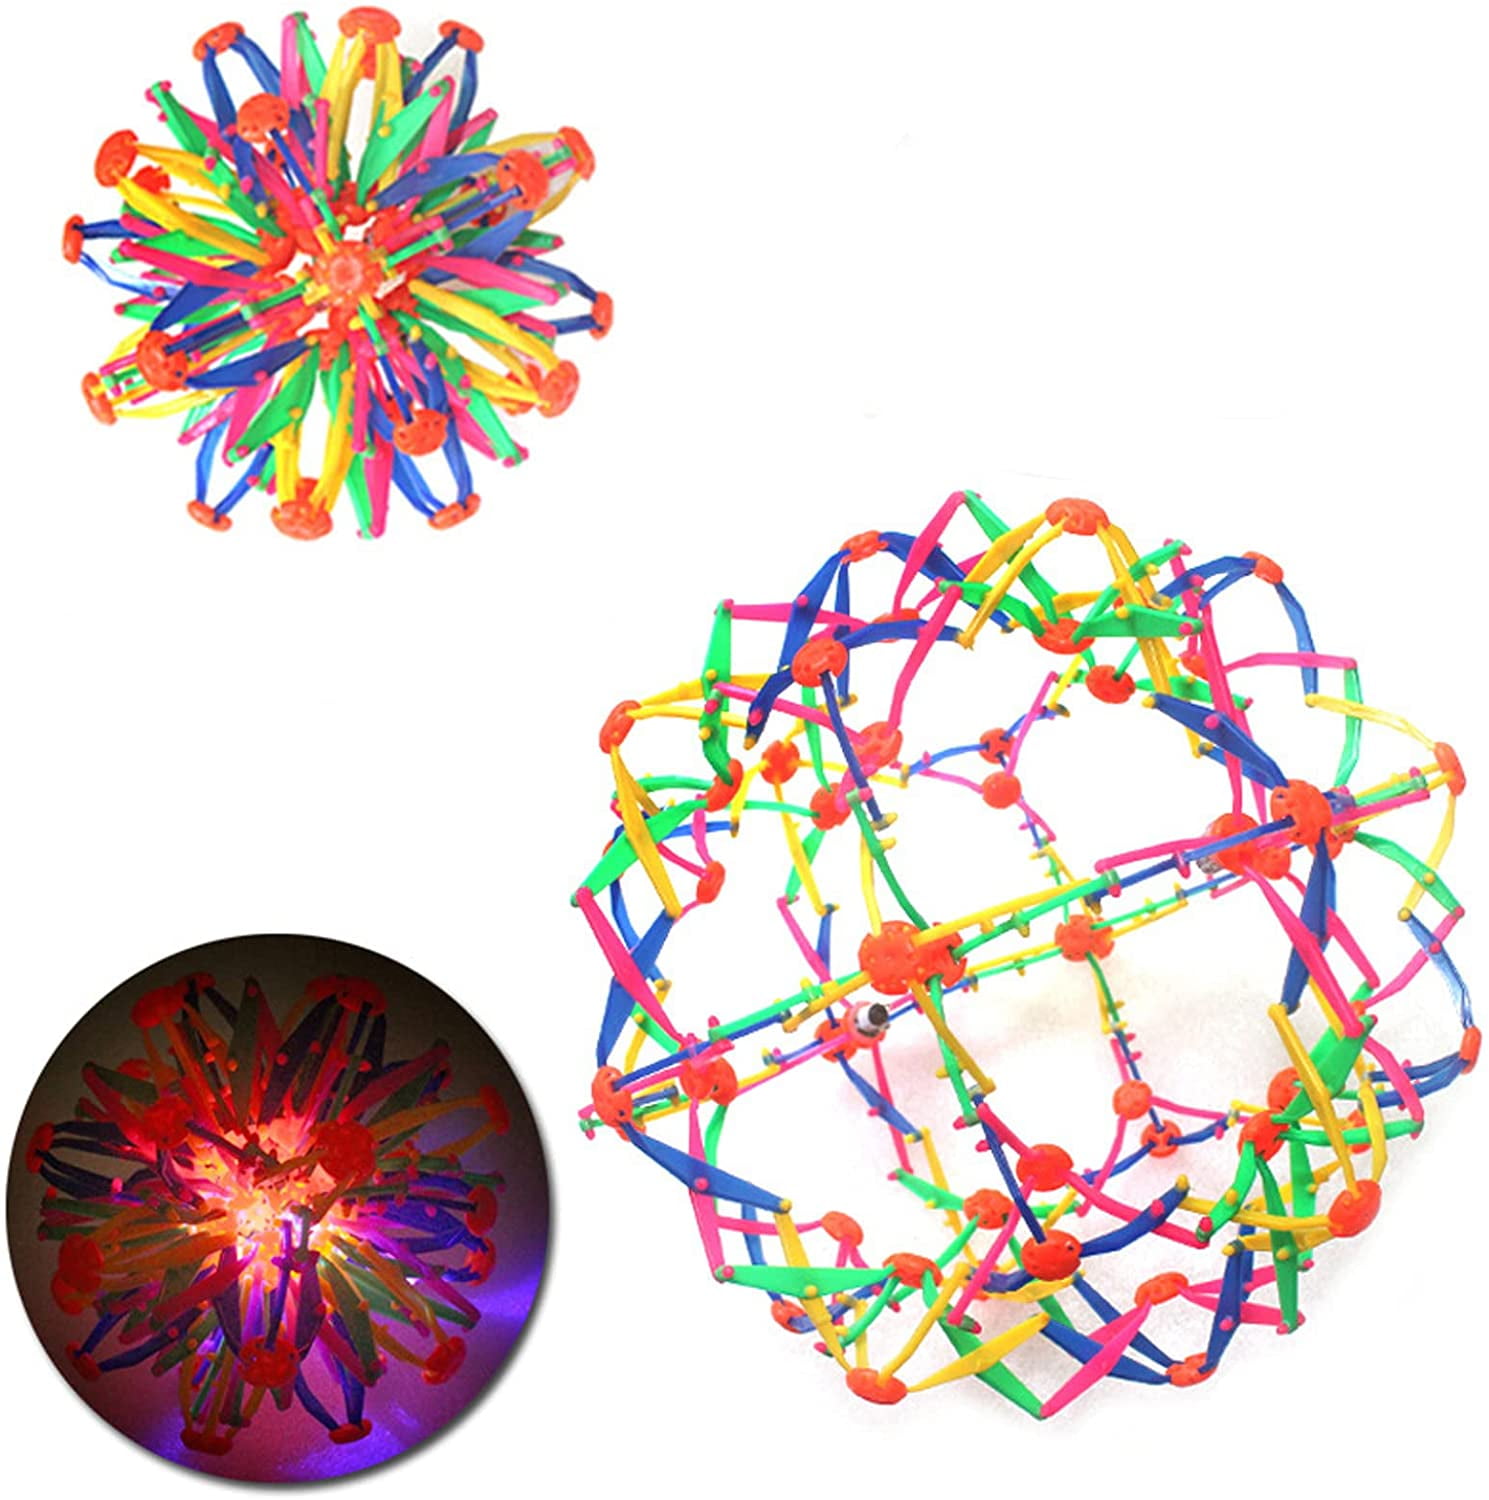 Set of 3 Expandable Sphere Balls Toy~Neon Colored Blue Pink & Green~Hand Catch Flower Balls~Great Gift for Kids!